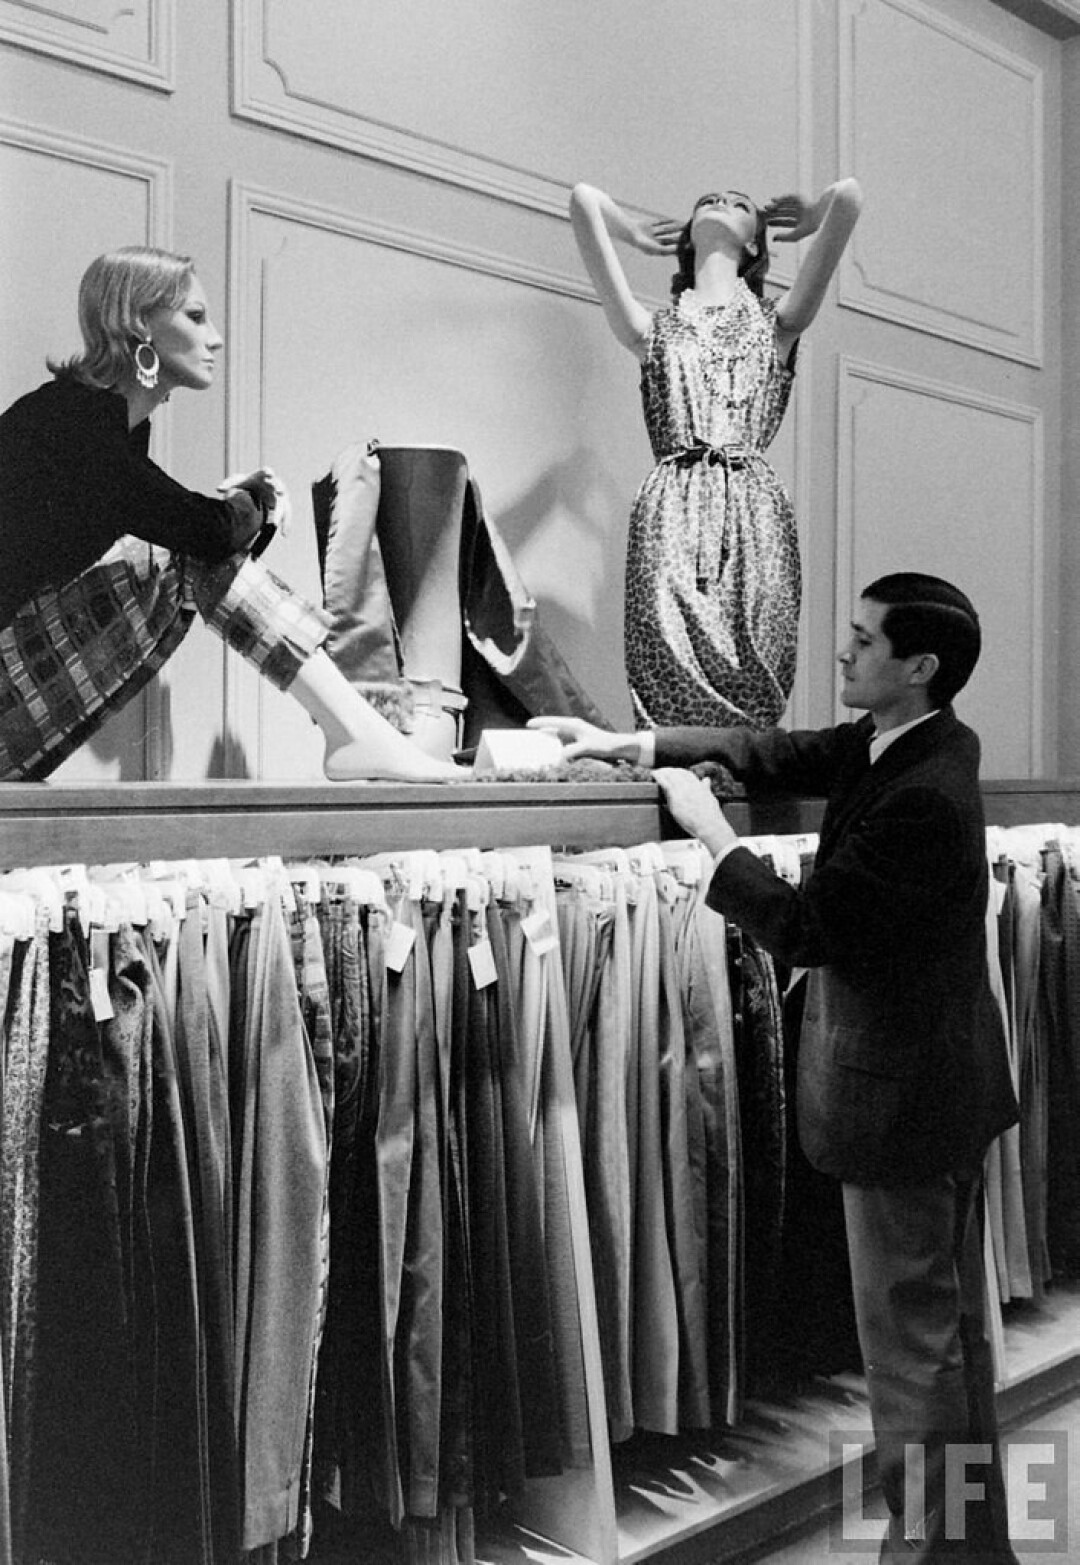 A photo from Time Magazine of the 1960s visual merchandising department of Saks Fifth Avenue in New York City. 